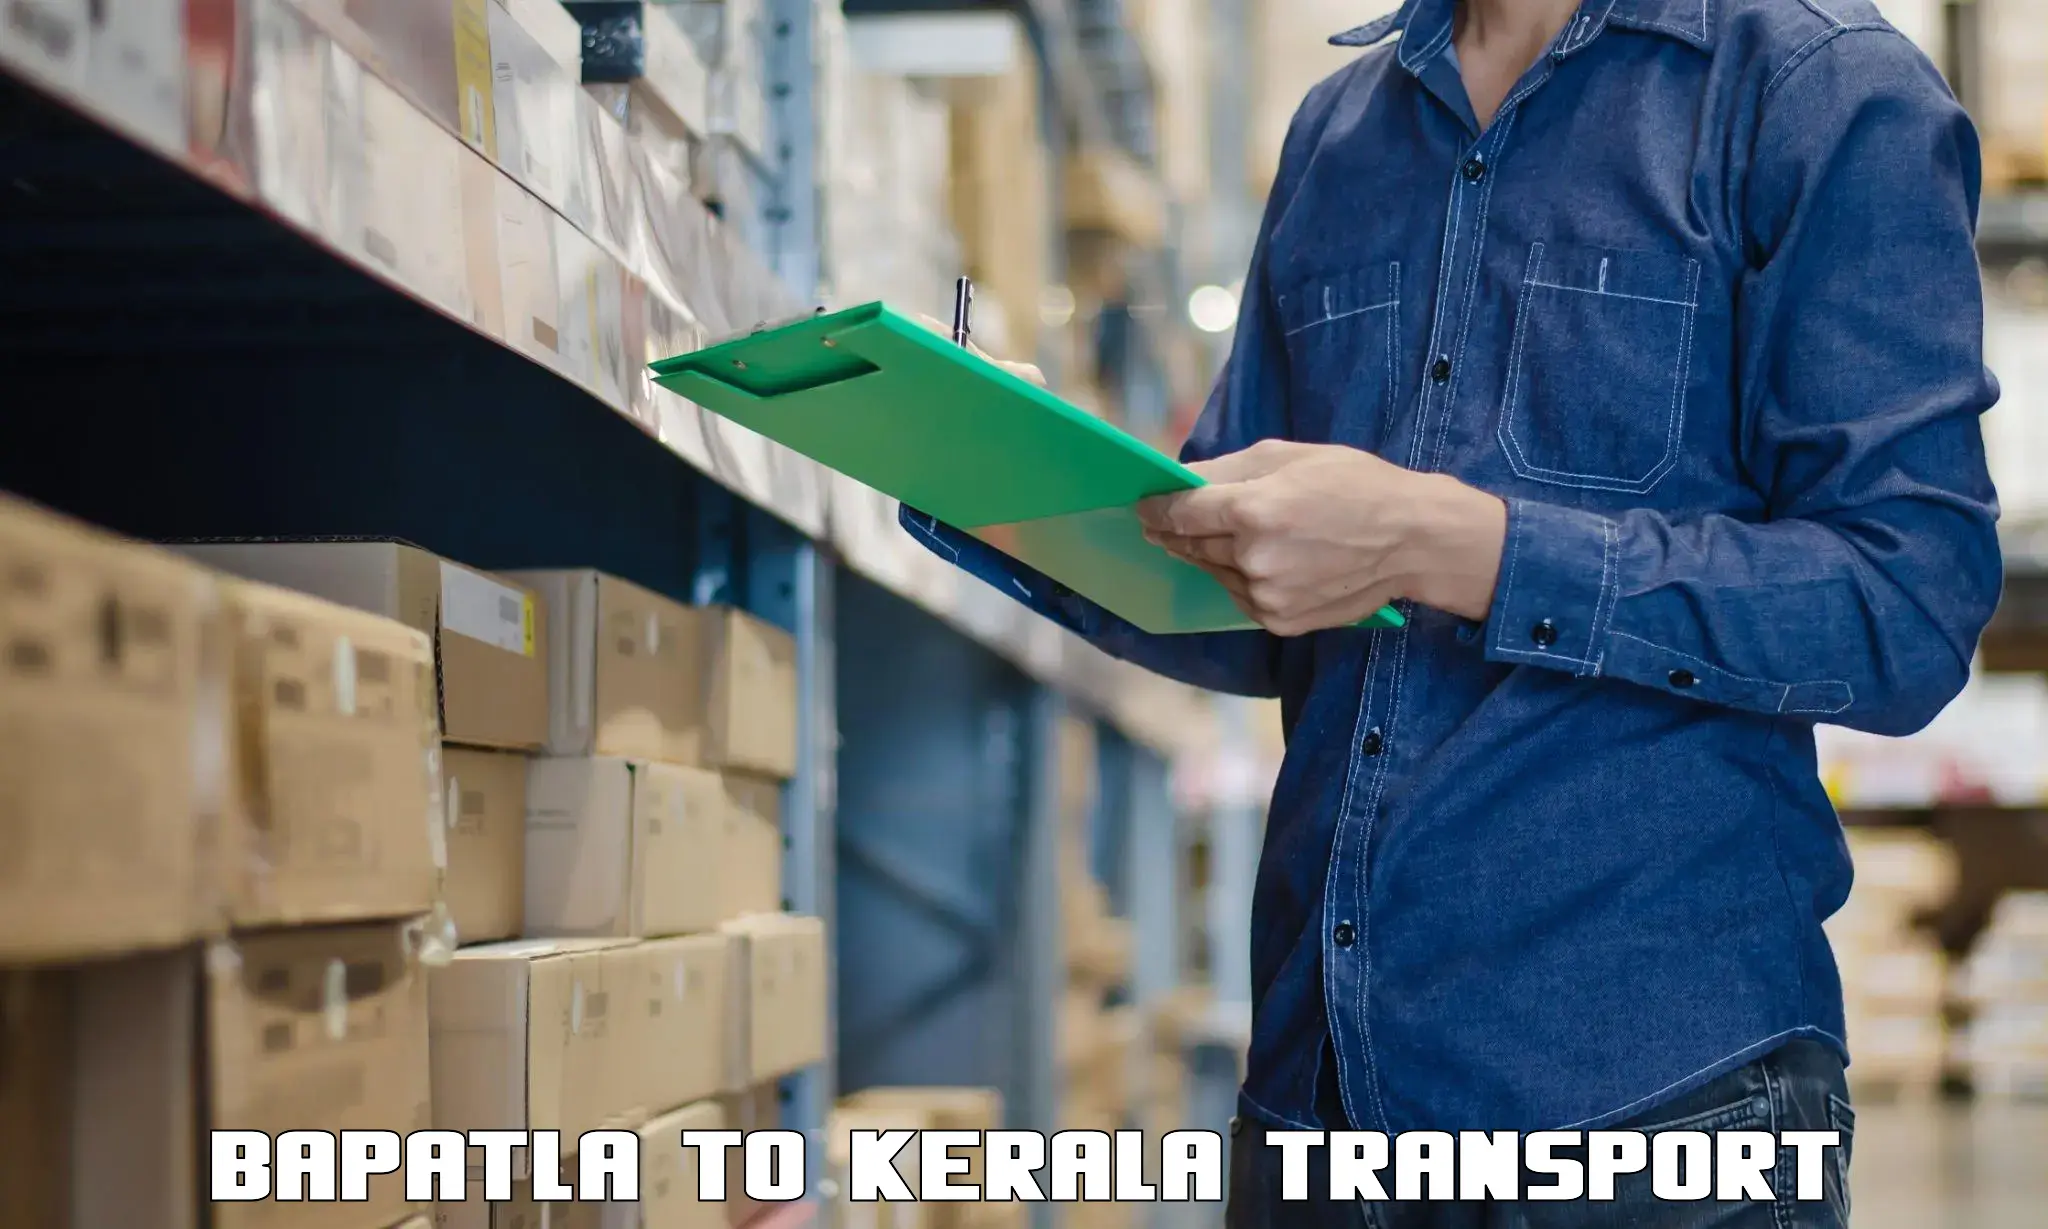 Daily parcel service transport Bapatla to Cochin University of Science and Technology